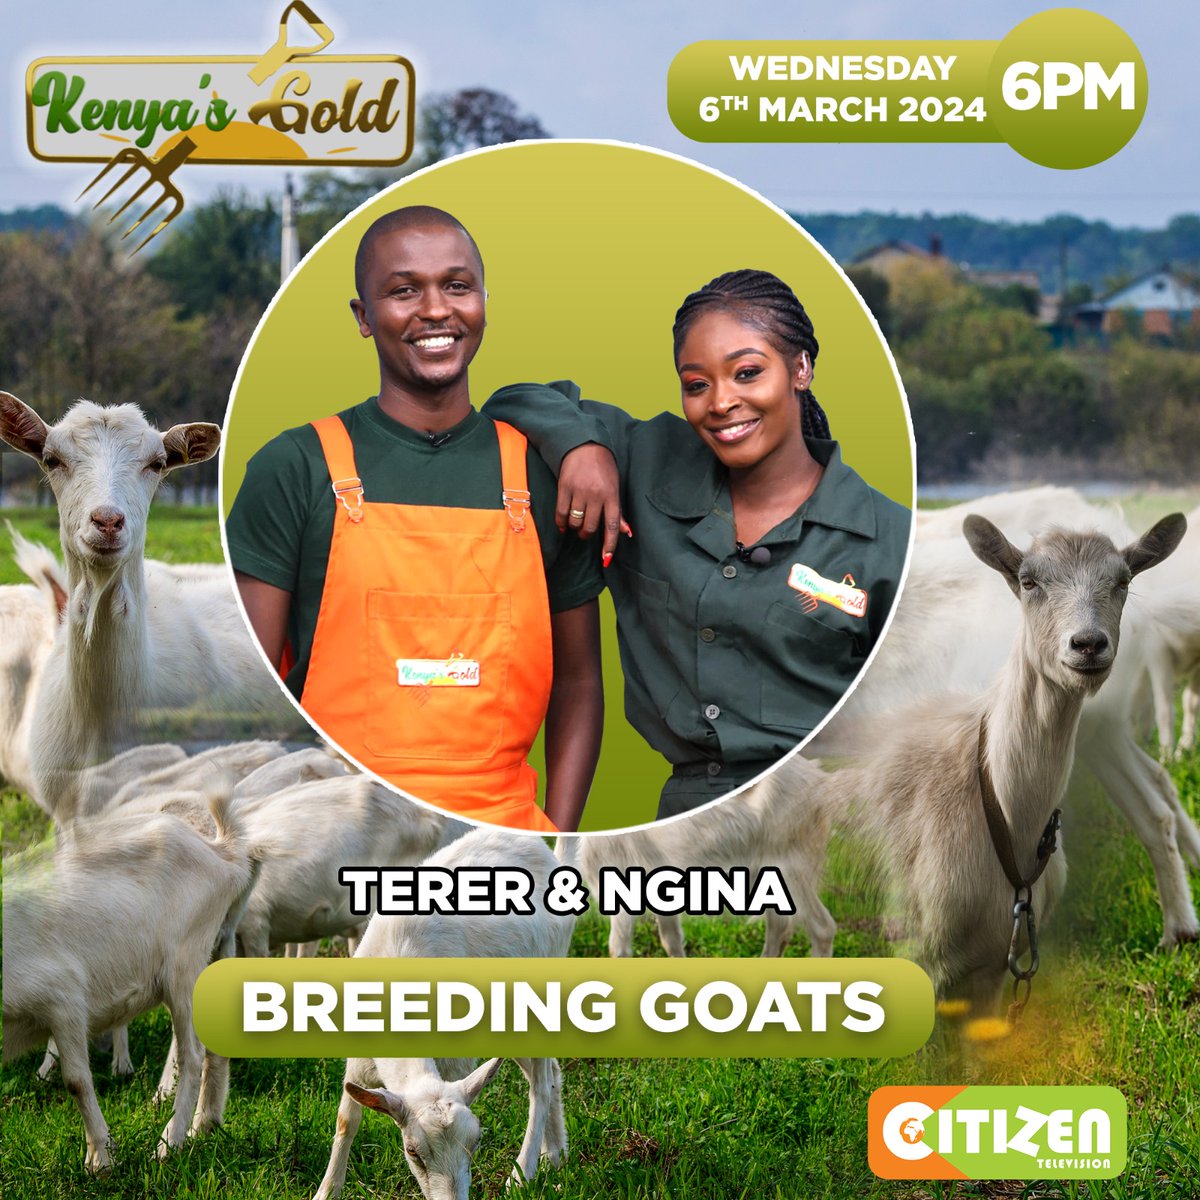 Tune in from 6:00pm as we look into galla goats which are known for their resilience and ability to thrive in drought-prone environments.